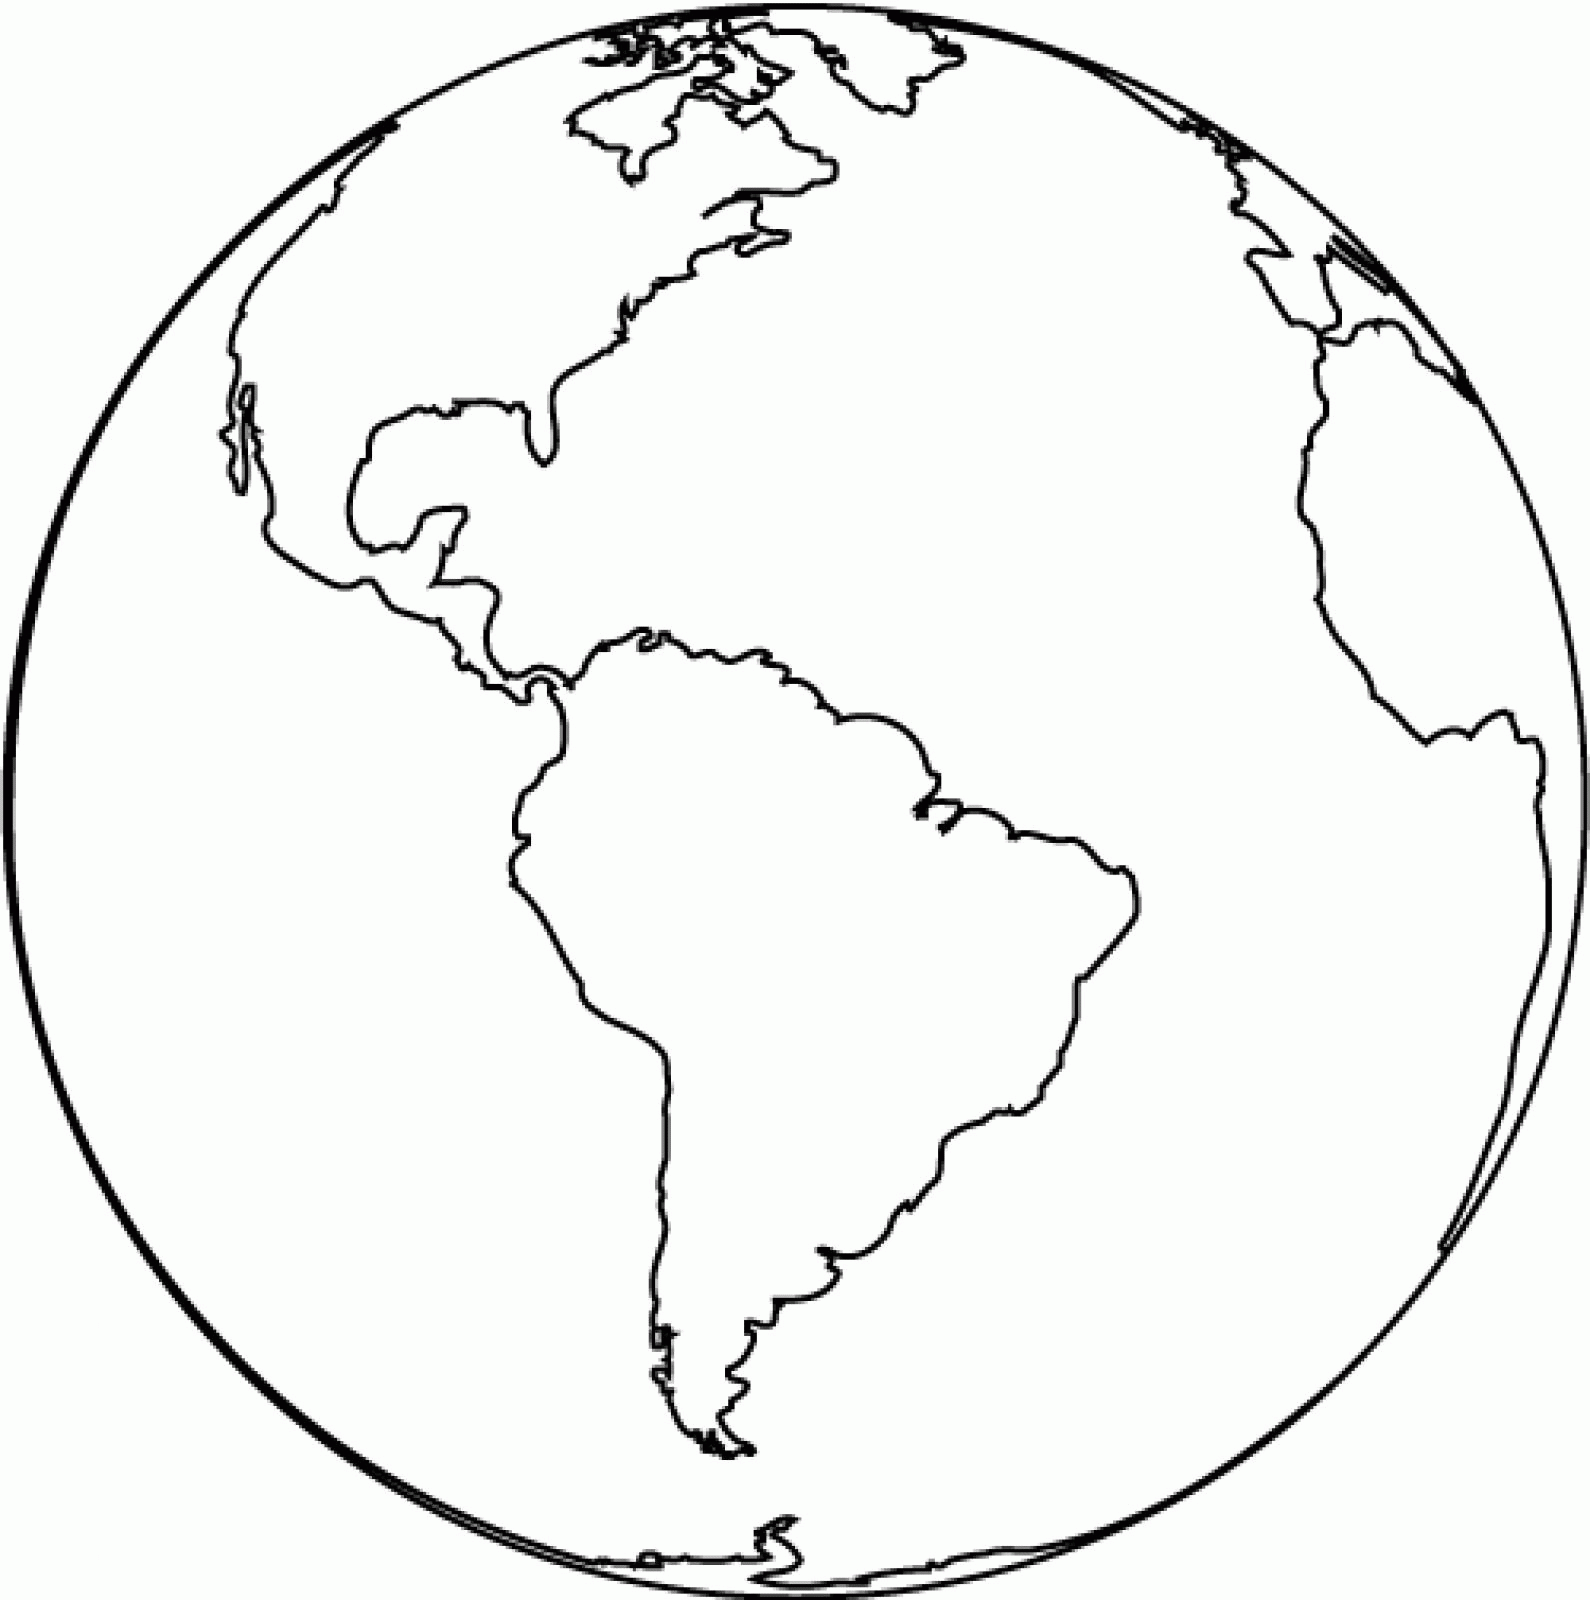 Coloring Page Of The World